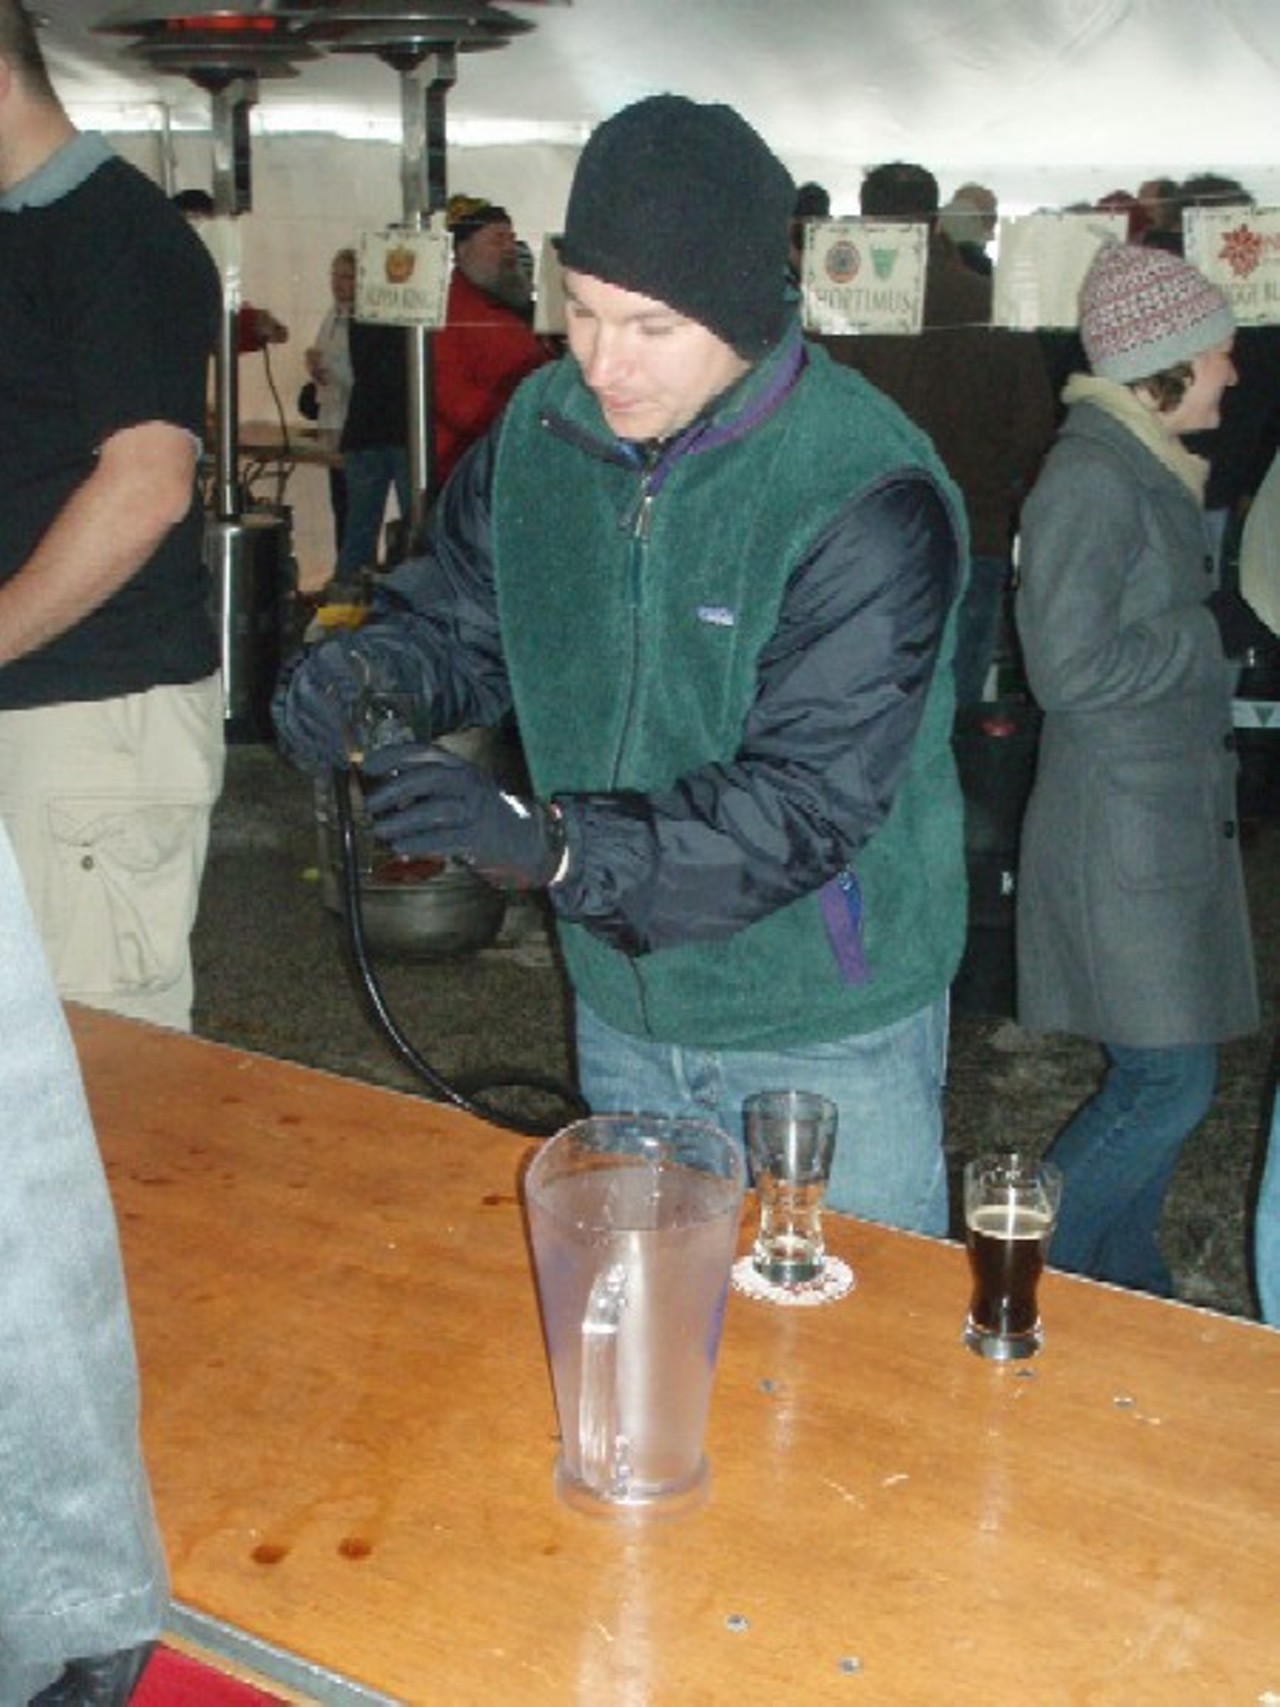 More than twelve varieties of beer were available under the tents, including the raspberry ale.